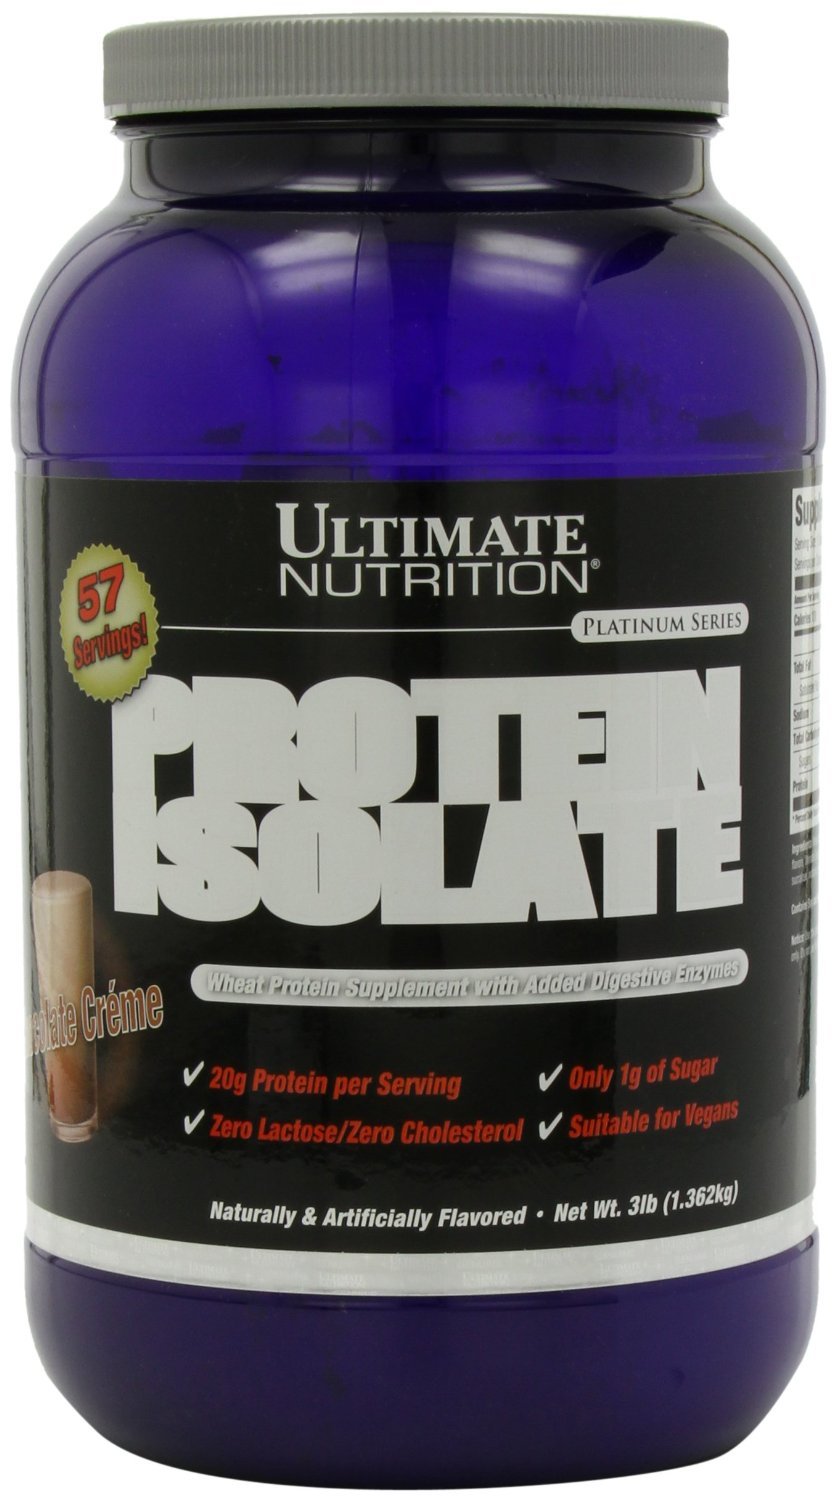 Ultimate Nutrition Protein Isolate, , 1362 g